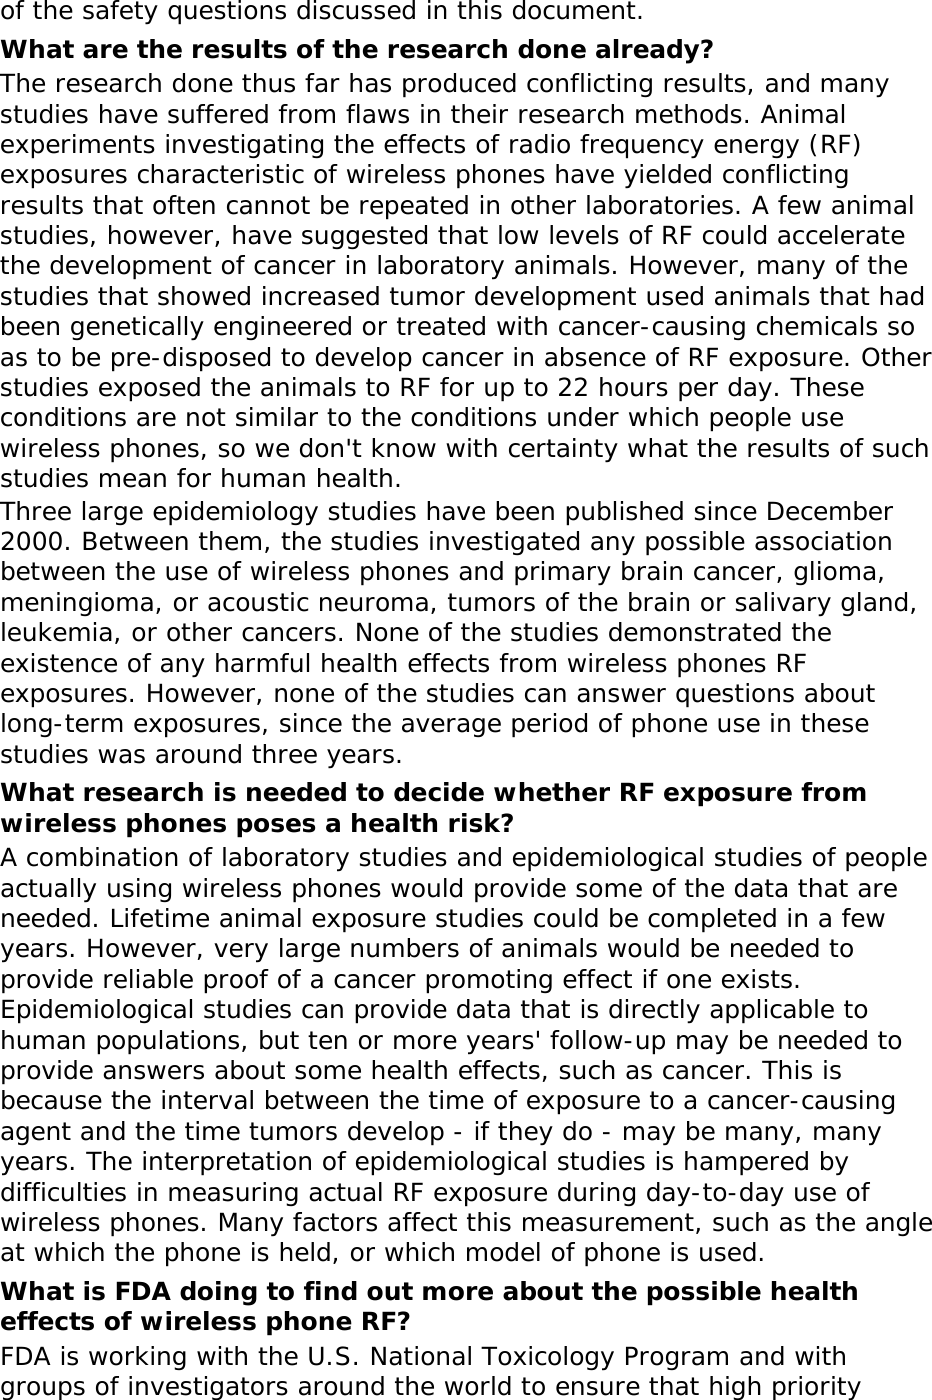 of the safety questions discussed in this document. What are the results of the research done already? The research done thus far has produced conflicting results, and many studies have suffered from flaws in their research methods. Animal experiments investigating the effects of radio frequency energy (RF) exposures characteristic of wireless phones have yielded conflicting results that often cannot be repeated in other laboratories. A few animal studies, however, have suggested that low levels of RF could accelerate the development of cancer in laboratory animals. However, many of the studies that showed increased tumor development used animals that had been genetically engineered or treated with cancer-causing chemicals so as to be pre-disposed to develop cancer in absence of RF exposure. Other studies exposed the animals to RF for up to 22 hours per day. These conditions are not similar to the conditions under which people use wireless phones, so we don&apos;t know with certainty what the results of such studies mean for human health. Three large epidemiology studies have been published since December 2000. Between them, the studies investigated any possible association between the use of wireless phones and primary brain cancer, glioma, meningioma, or acoustic neuroma, tumors of the brain or salivary gland, leukemia, or other cancers. None of the studies demonstrated the existence of any harmful health effects from wireless phones RF exposures. However, none of the studies can answer questions about long-term exposures, since the average period of phone use in these studies was around three years. What research is needed to decide whether RF exposure from wireless phones poses a health risk? A combination of laboratory studies and epidemiological studies of people actually using wireless phones would provide some of the data that are needed. Lifetime animal exposure studies could be completed in a few years. However, very large numbers of animals would be needed to provide reliable proof of a cancer promoting effect if one exists. Epidemiological studies can provide data that is directly applicable to human populations, but ten or more years&apos; follow-up may be needed to provide answers about some health effects, such as cancer. This is because the interval between the time of exposure to a cancer-causing agent and the time tumors develop - if they do - may be many, many years. The interpretation of epidemiological studies is hampered by difficulties in measuring actual RF exposure during day-to-day use of wireless phones. Many factors affect this measurement, such as the angle at which the phone is held, or which model of phone is used. What is FDA doing to find out more about the possible health effects of wireless phone RF? FDA is working with the U.S. National Toxicology Program and with groups of investigators around the world to ensure that high priority 